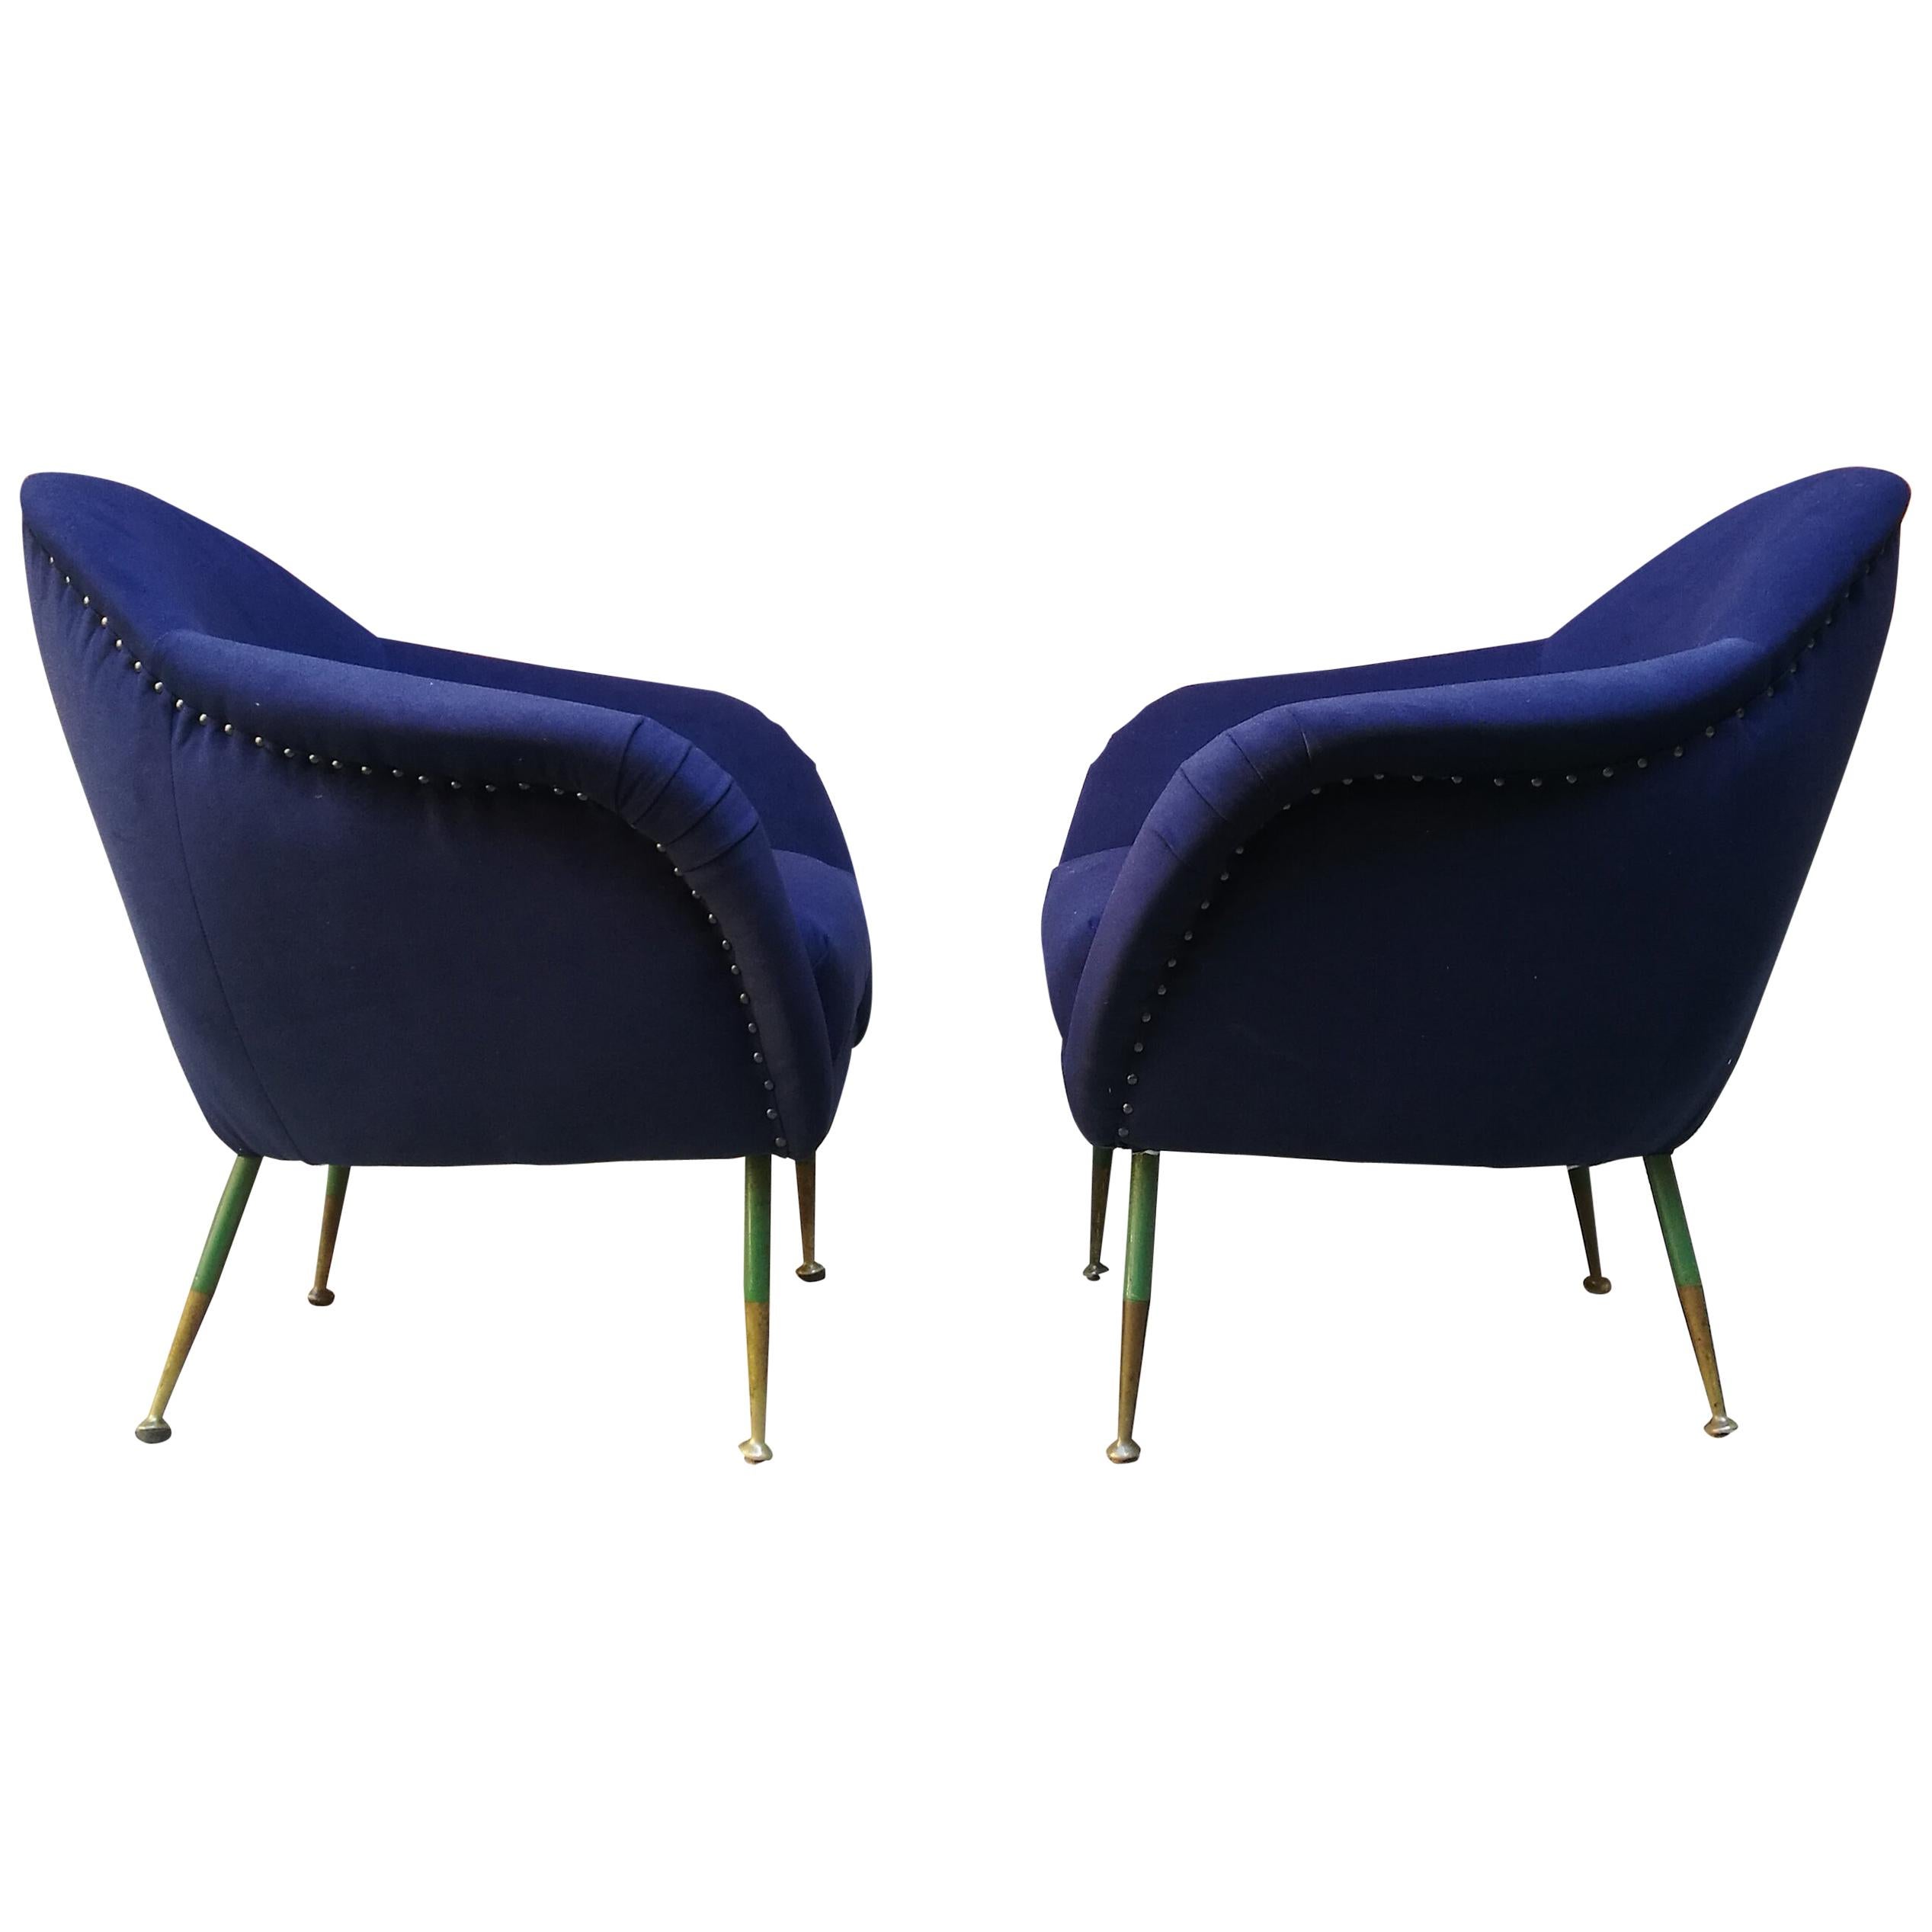 Pair of Midcentury Armchairs in Fabric Blu with Green Legs and Brass, 1960